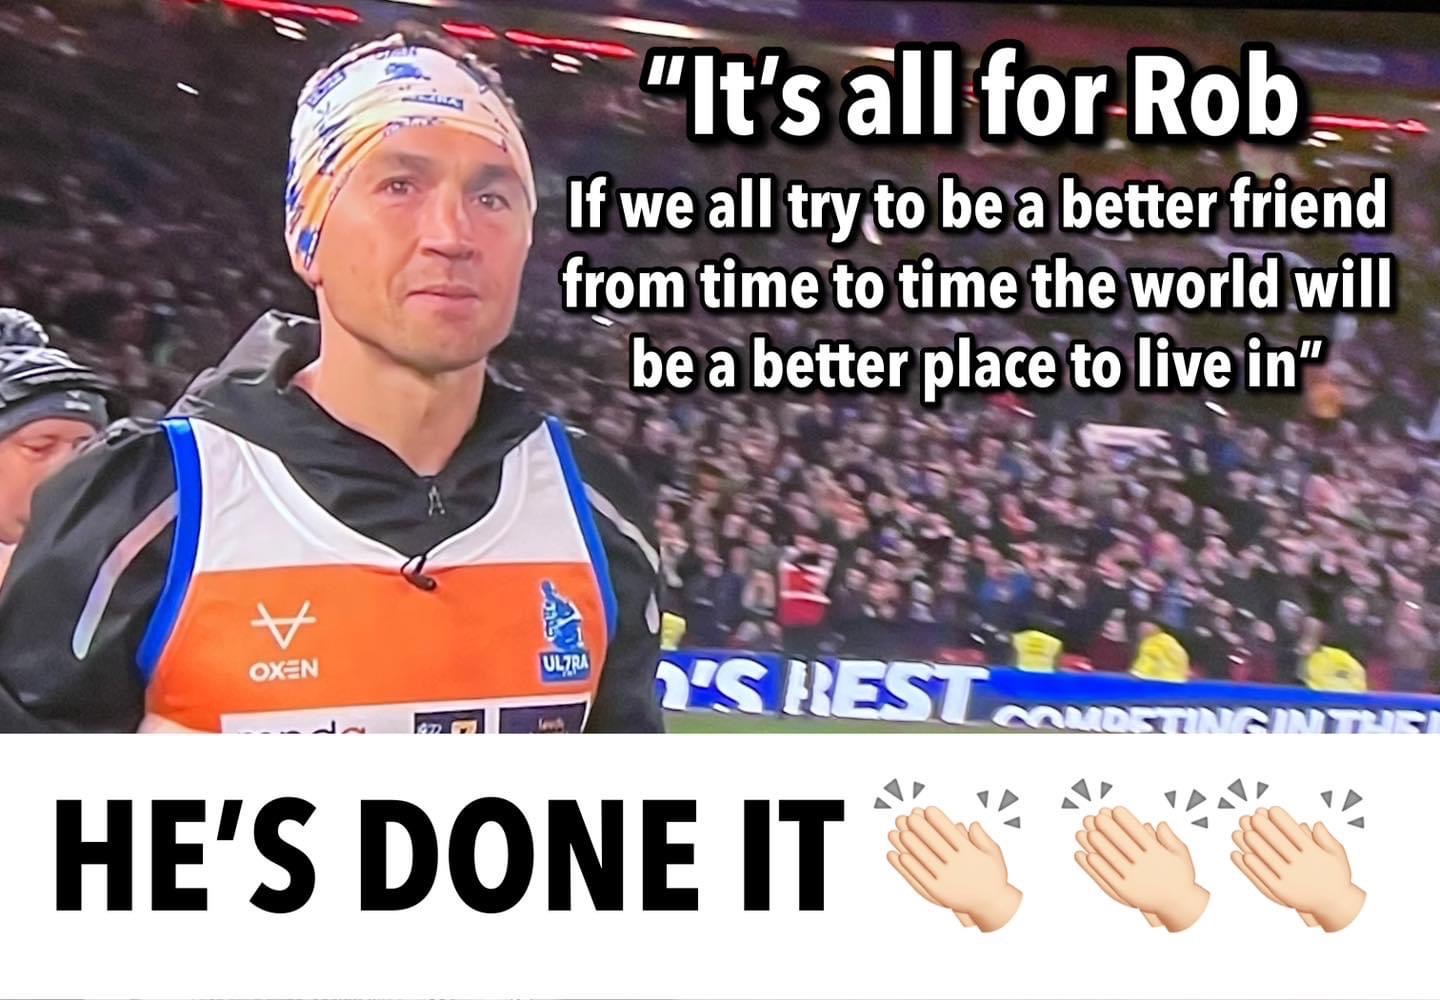 Inspired by Kevin Sinfield